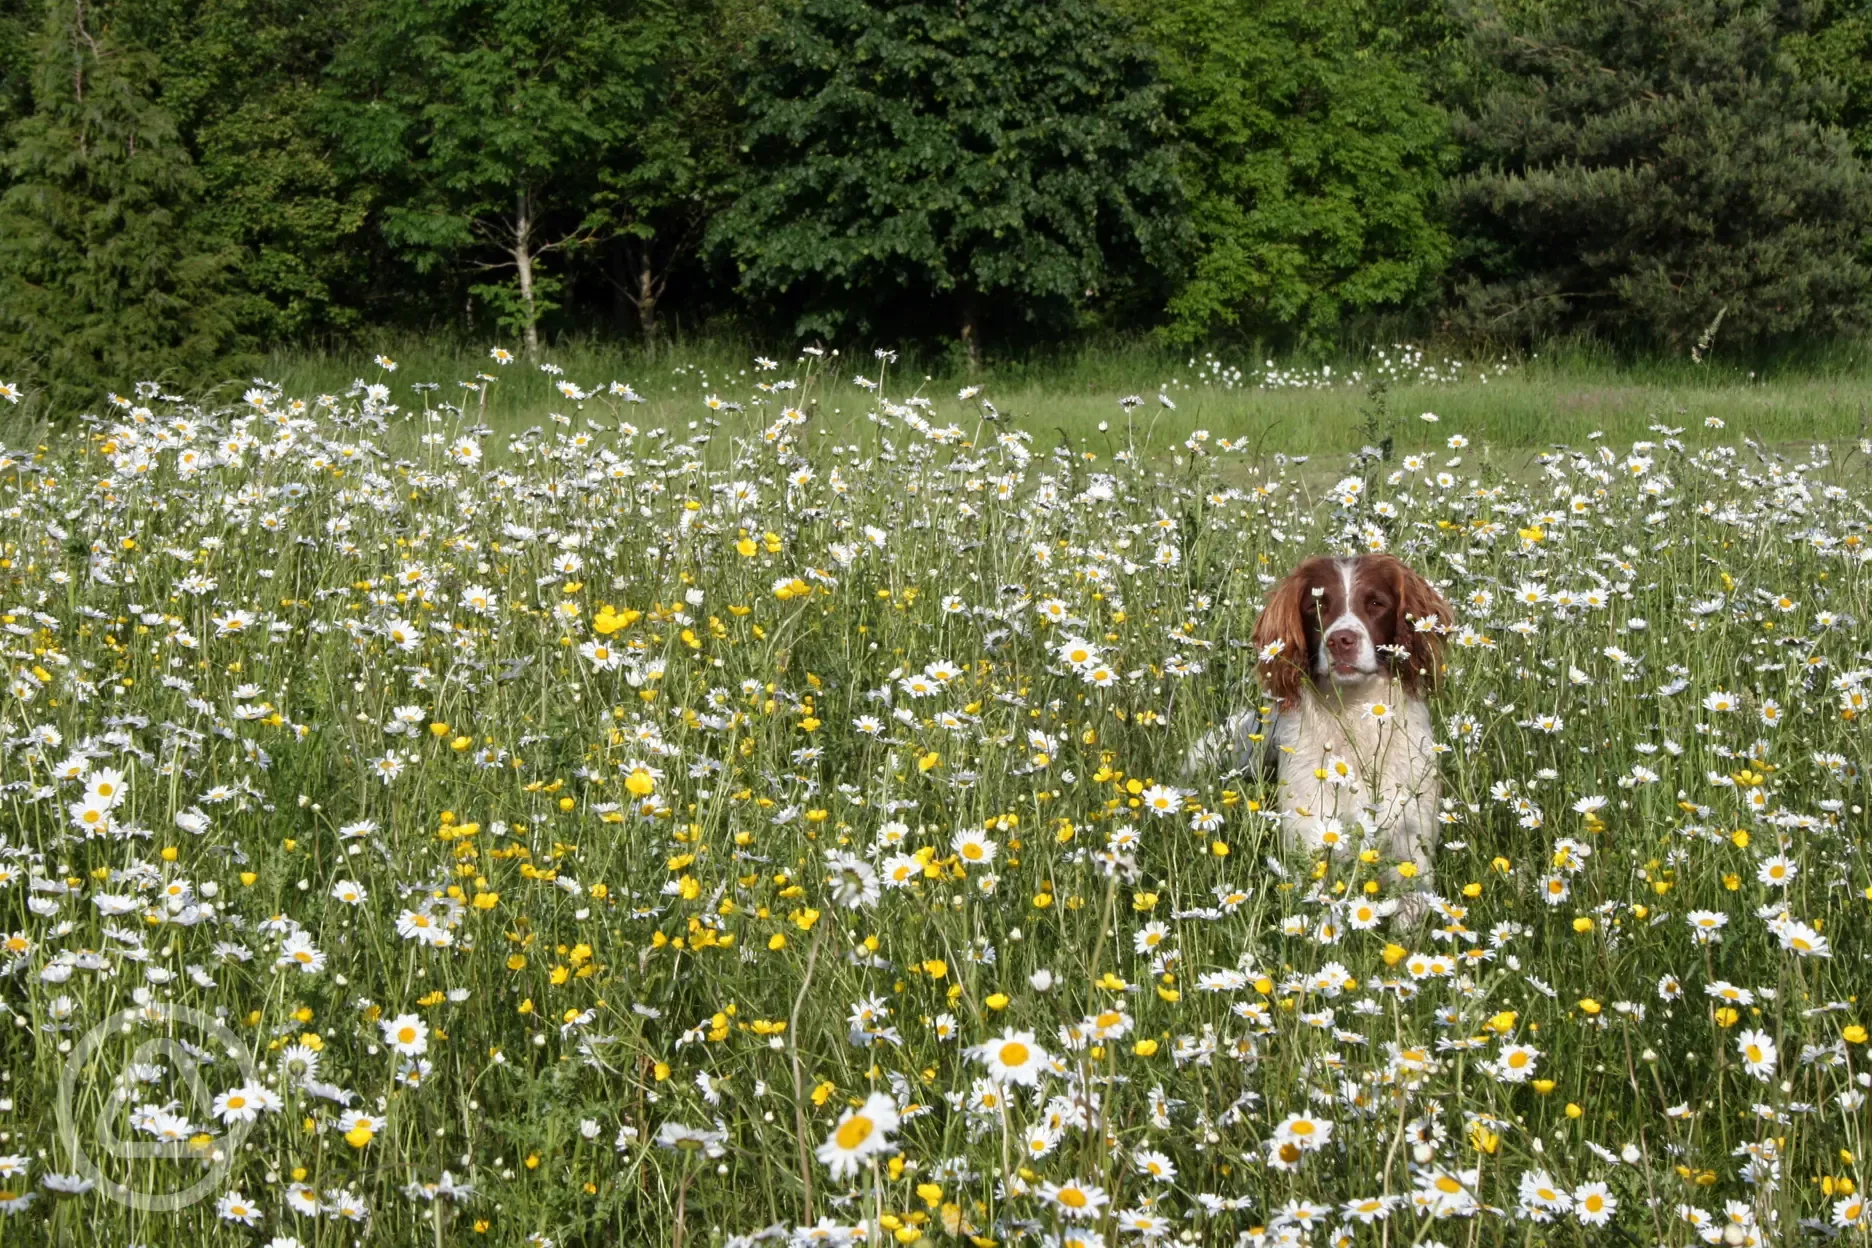 Dog in the daisies